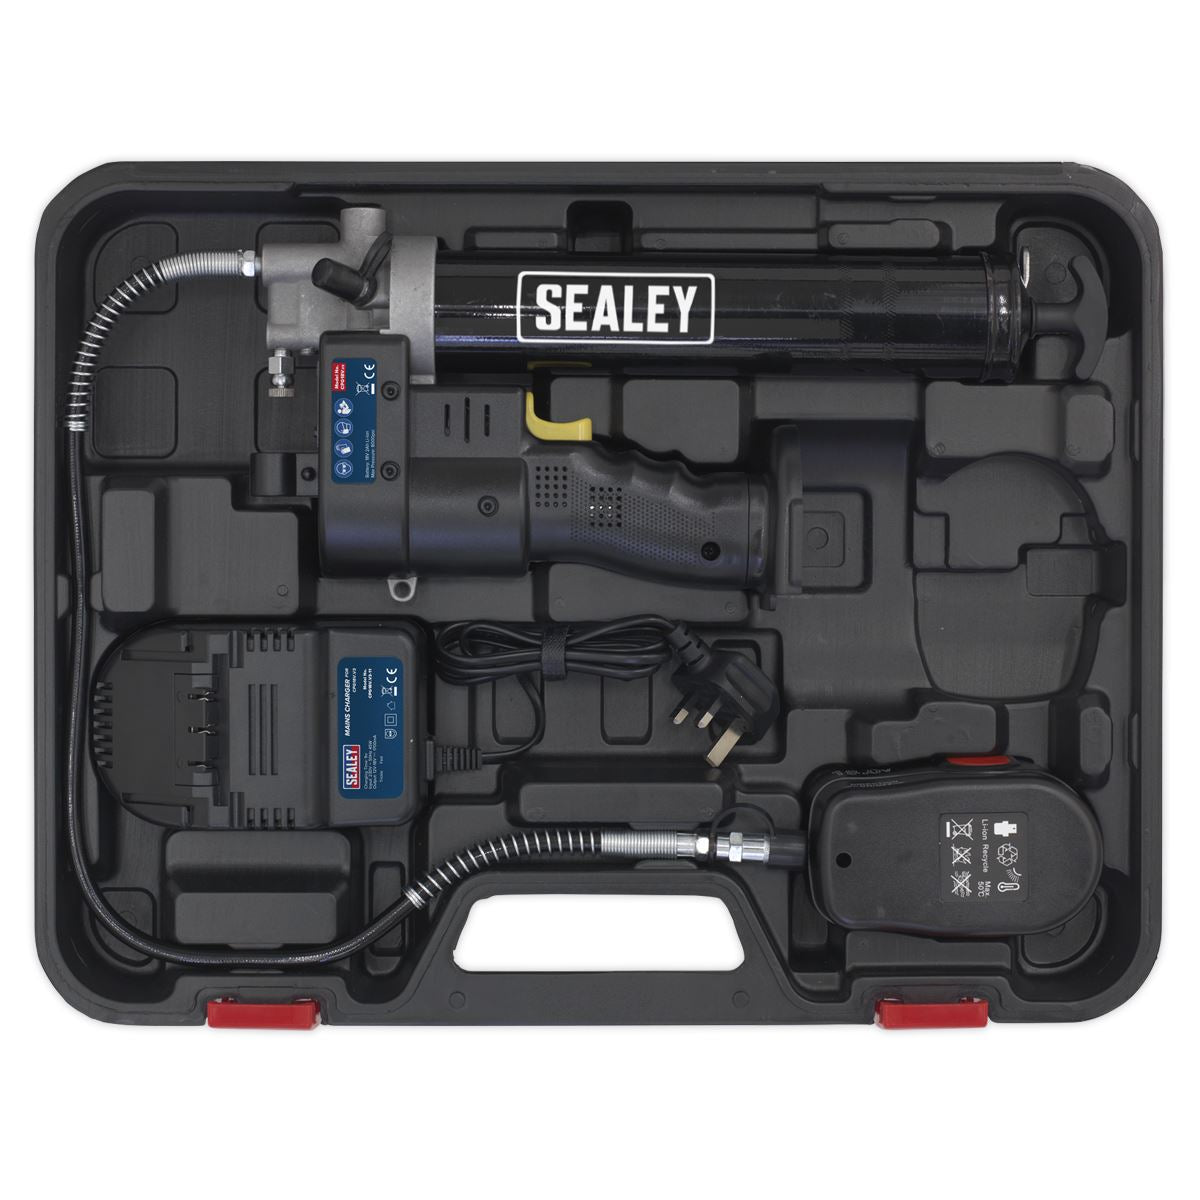 Sealey 18V Cordless Grease Gun 1.7Ah Battery and Mains Charger in Carry Case